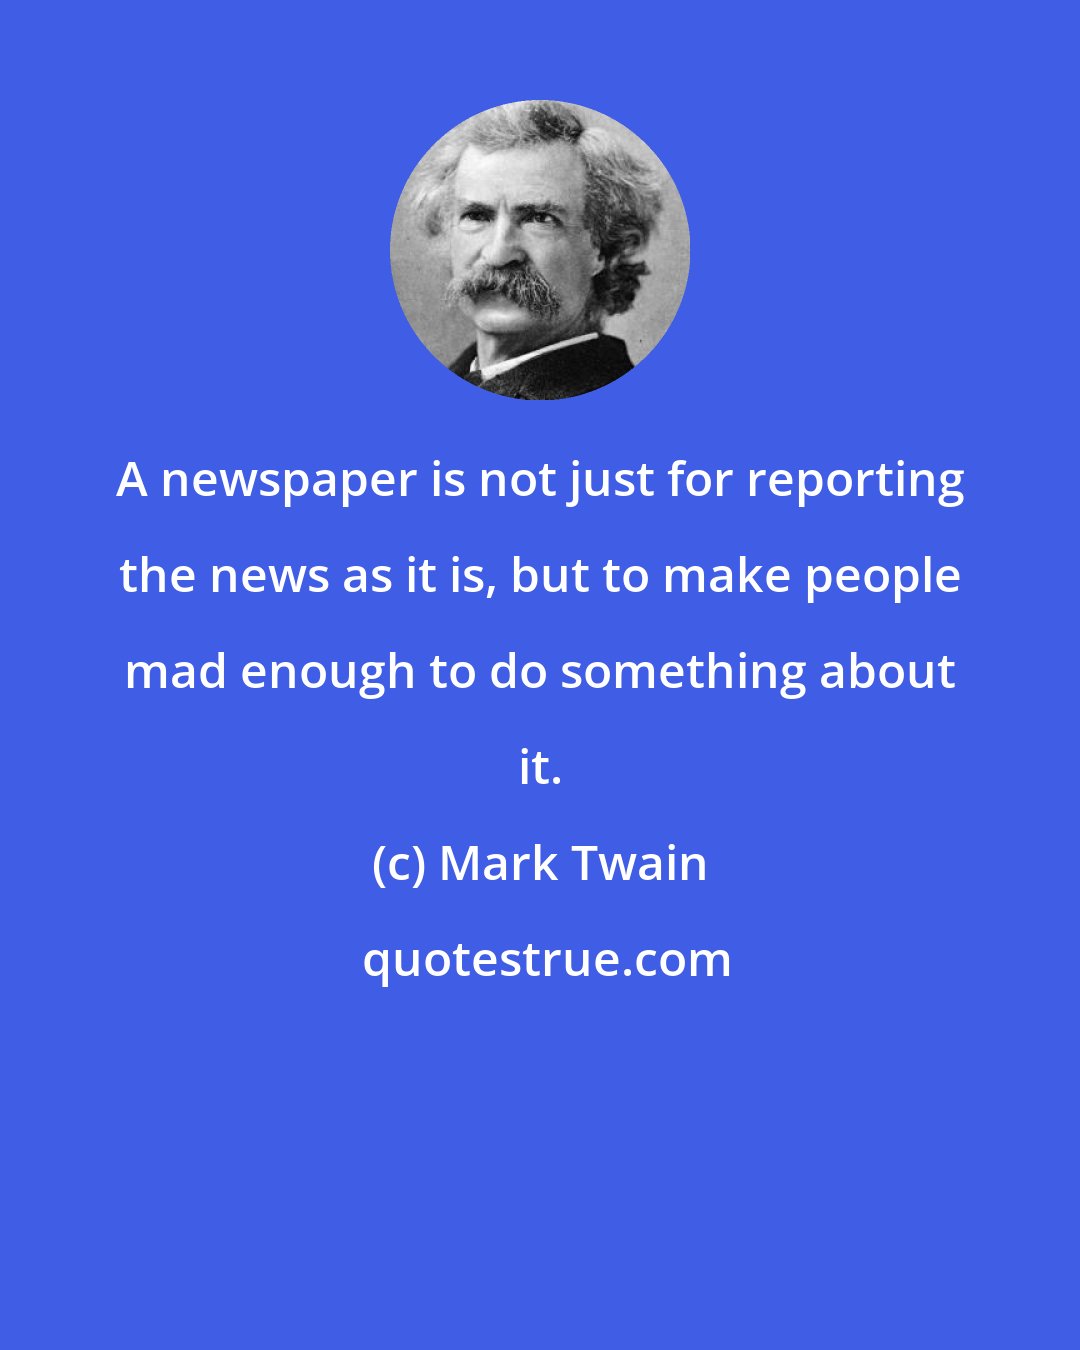 Mark Twain: A newspaper is not just for reporting the news as it is, but to make people mad enough to do something about it.